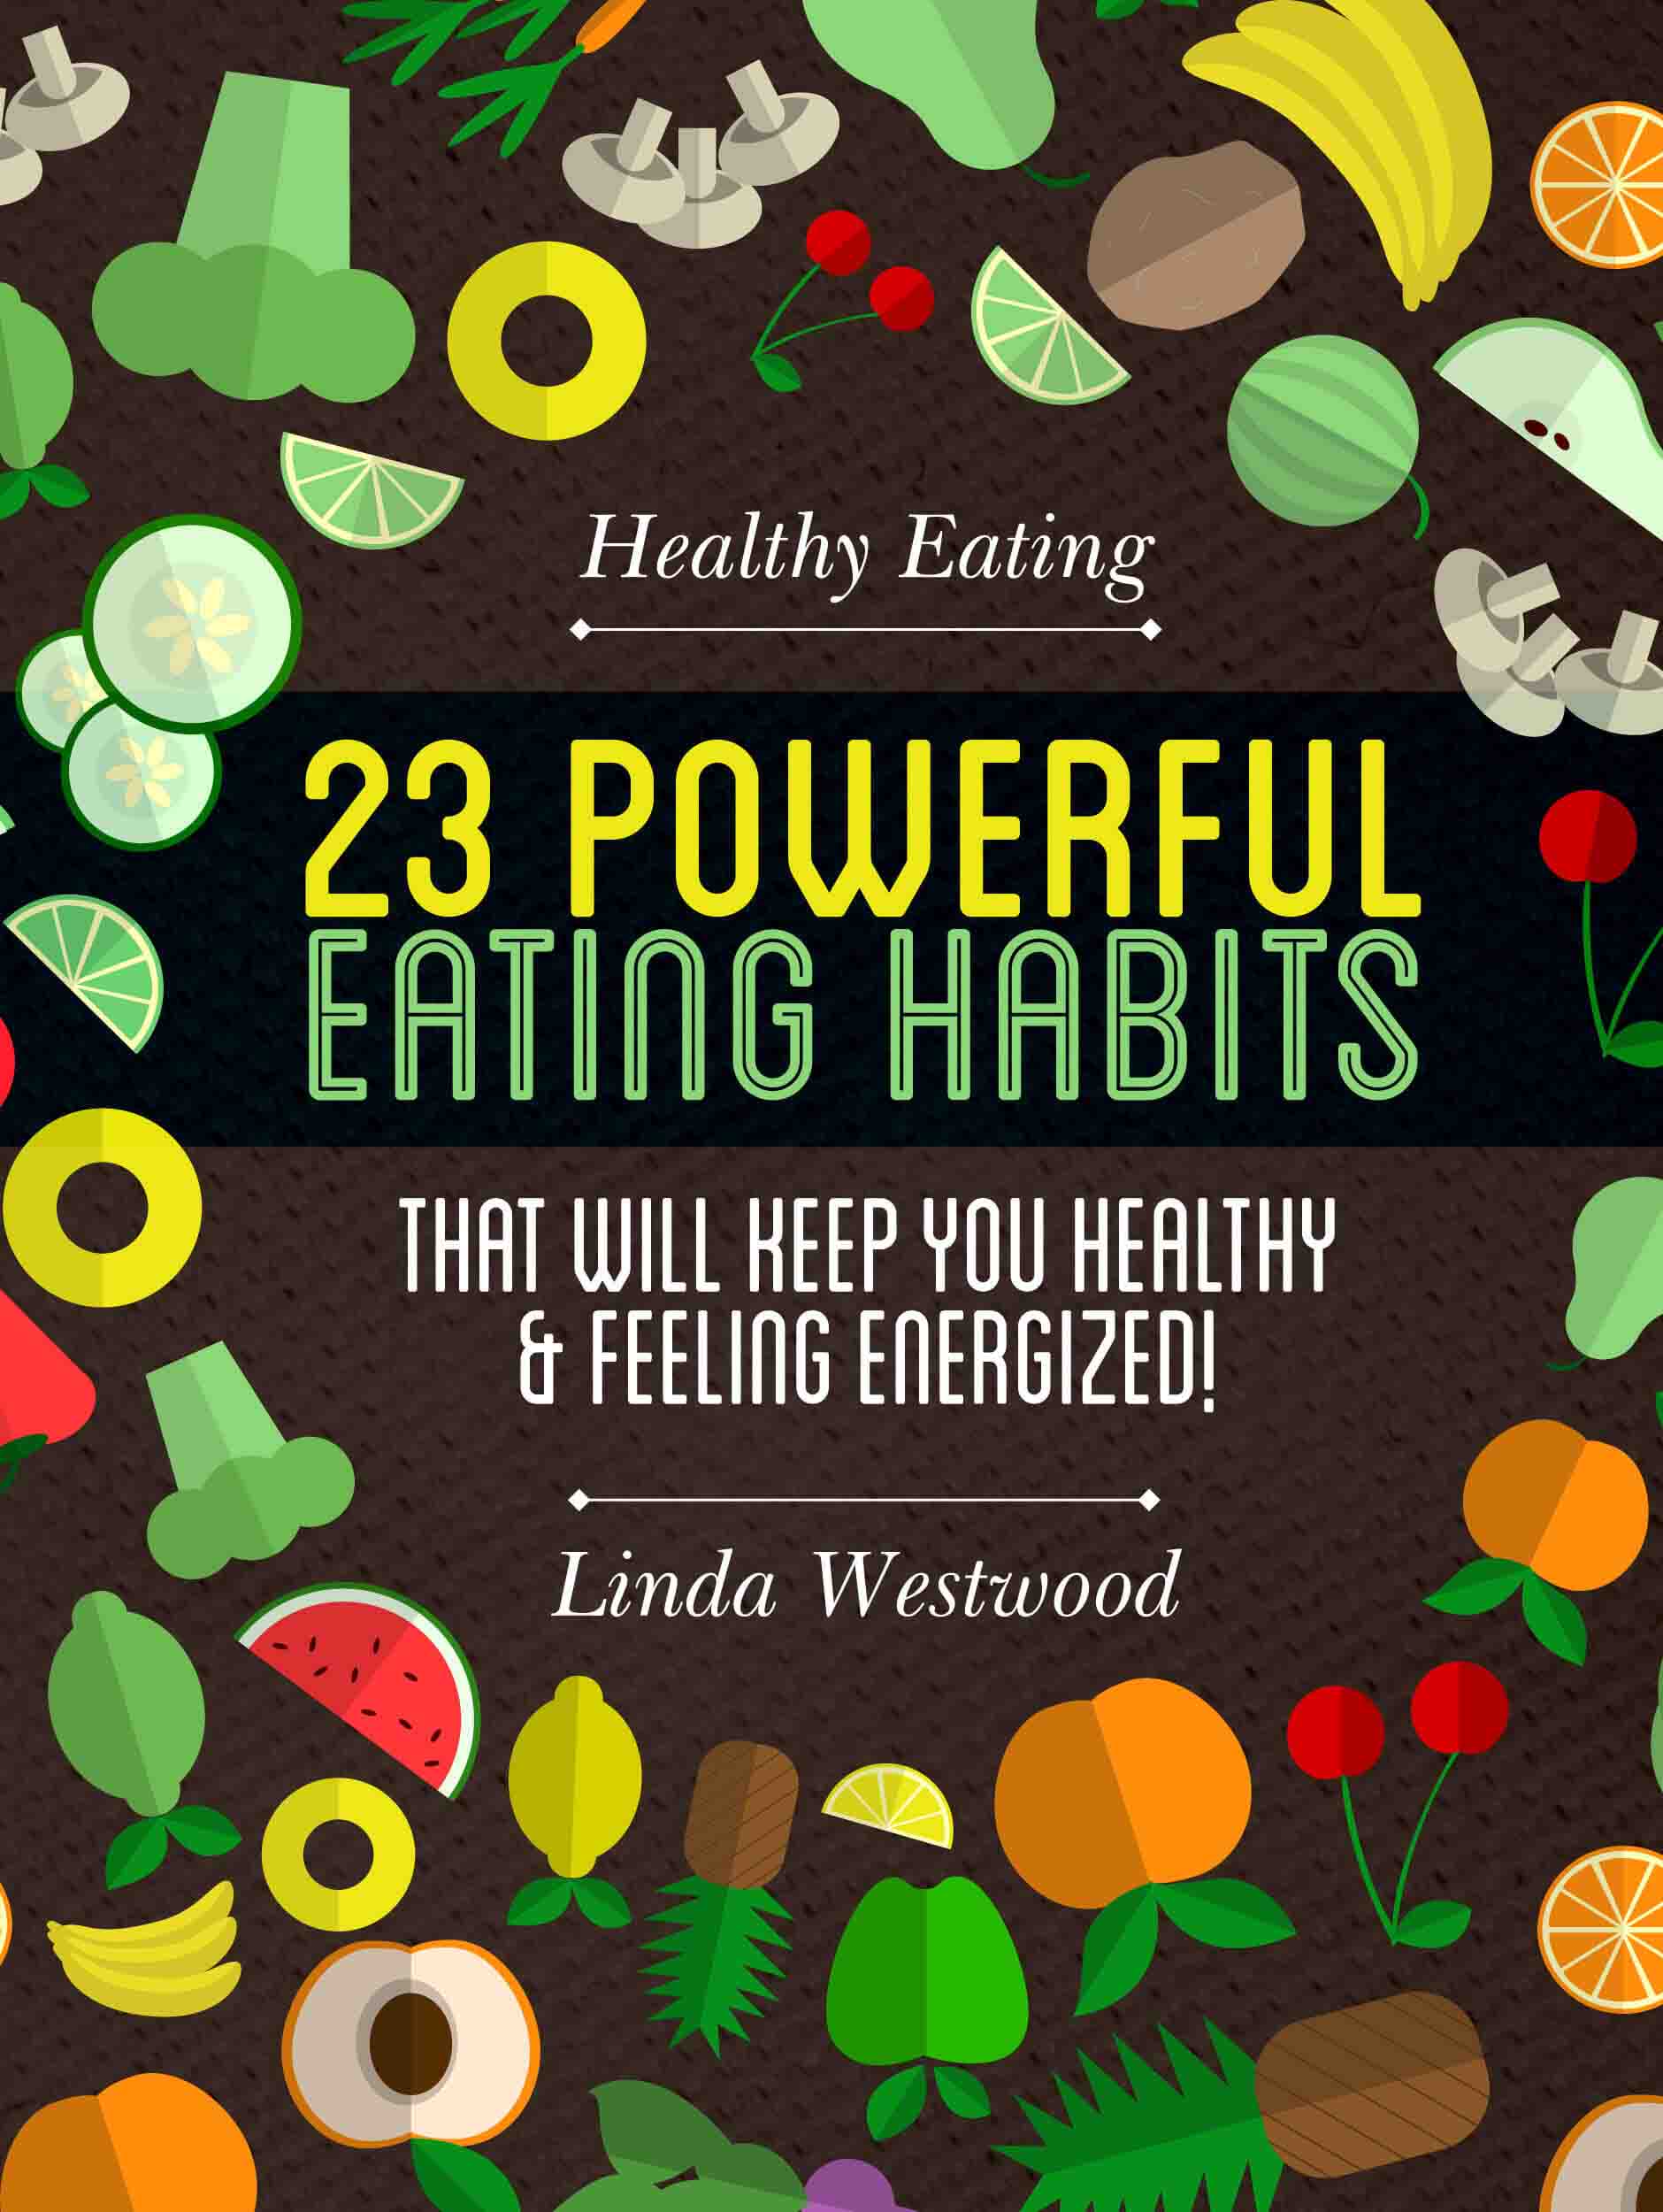 FREE: Healthy Eating: 23 POWERFUL Eating Habits That Will Keep You Healthy & Feeling Energized! by Linda Westwood